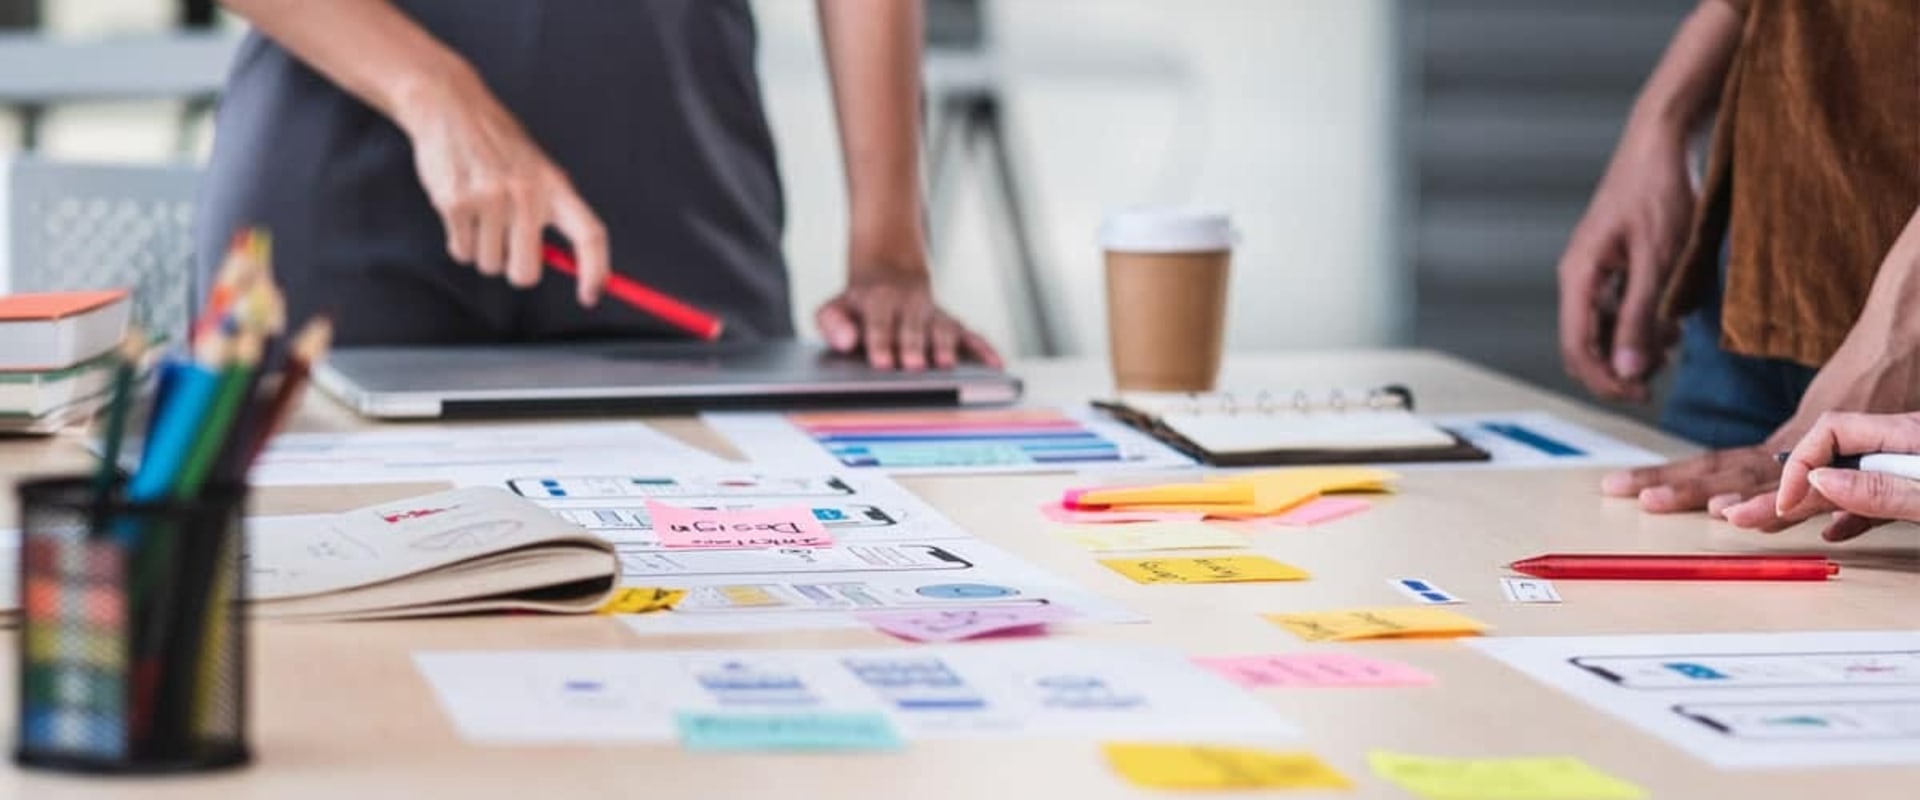 How to Choose the Right Website Design for Your Small Business